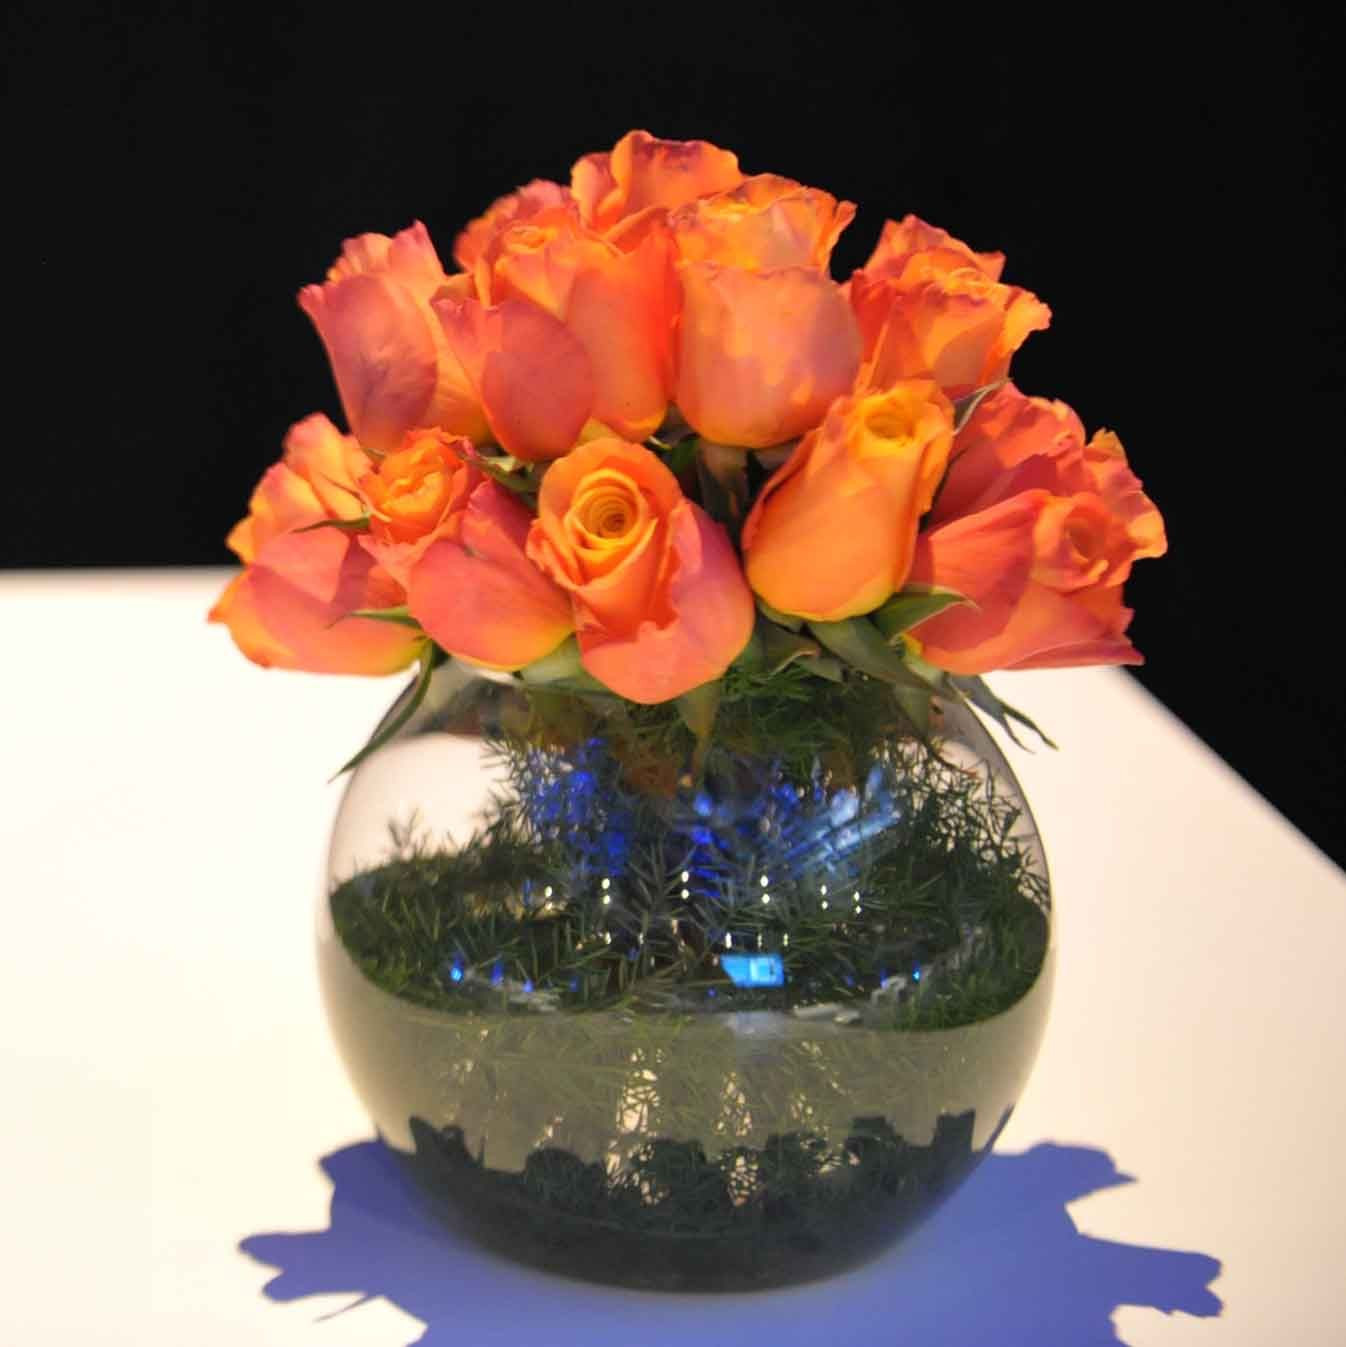 14 Ideal orange Bowls and Vases 2024 free download orange bowls and vases of orange flower vase photos 8 od orange rose foliage lined gold fish with regard to orange flower vase photos 8 od orange rose foliage lined gold fish bowl of orange 